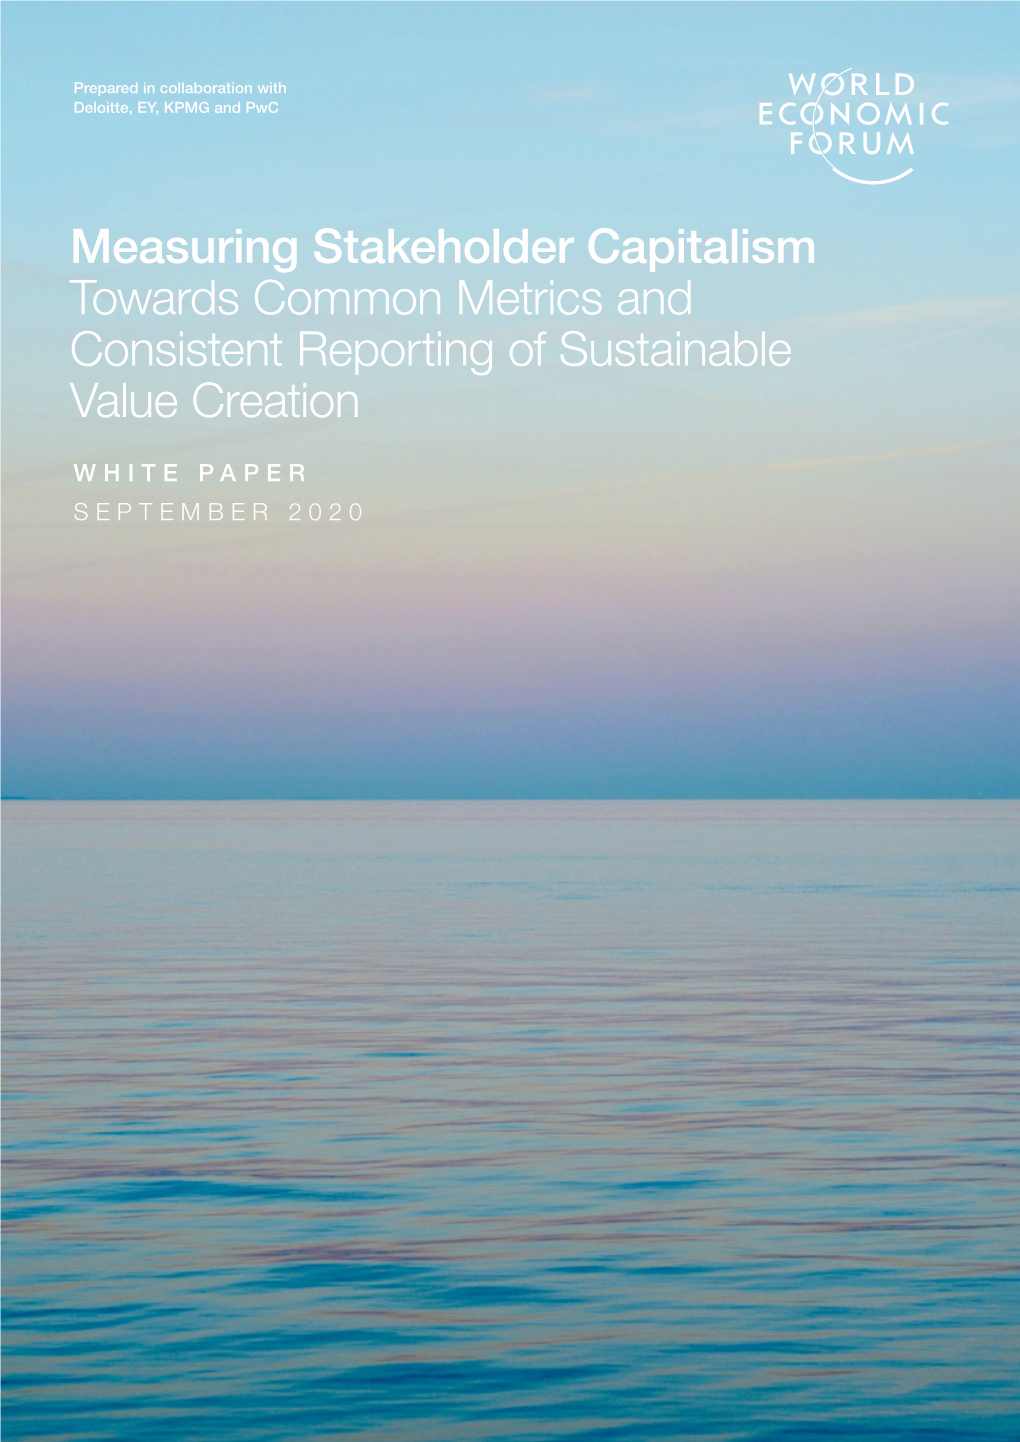 Measuring Stakeholder Capitalism Towards Common Metrics and Consistent Reporting of Sustainable Value Creation